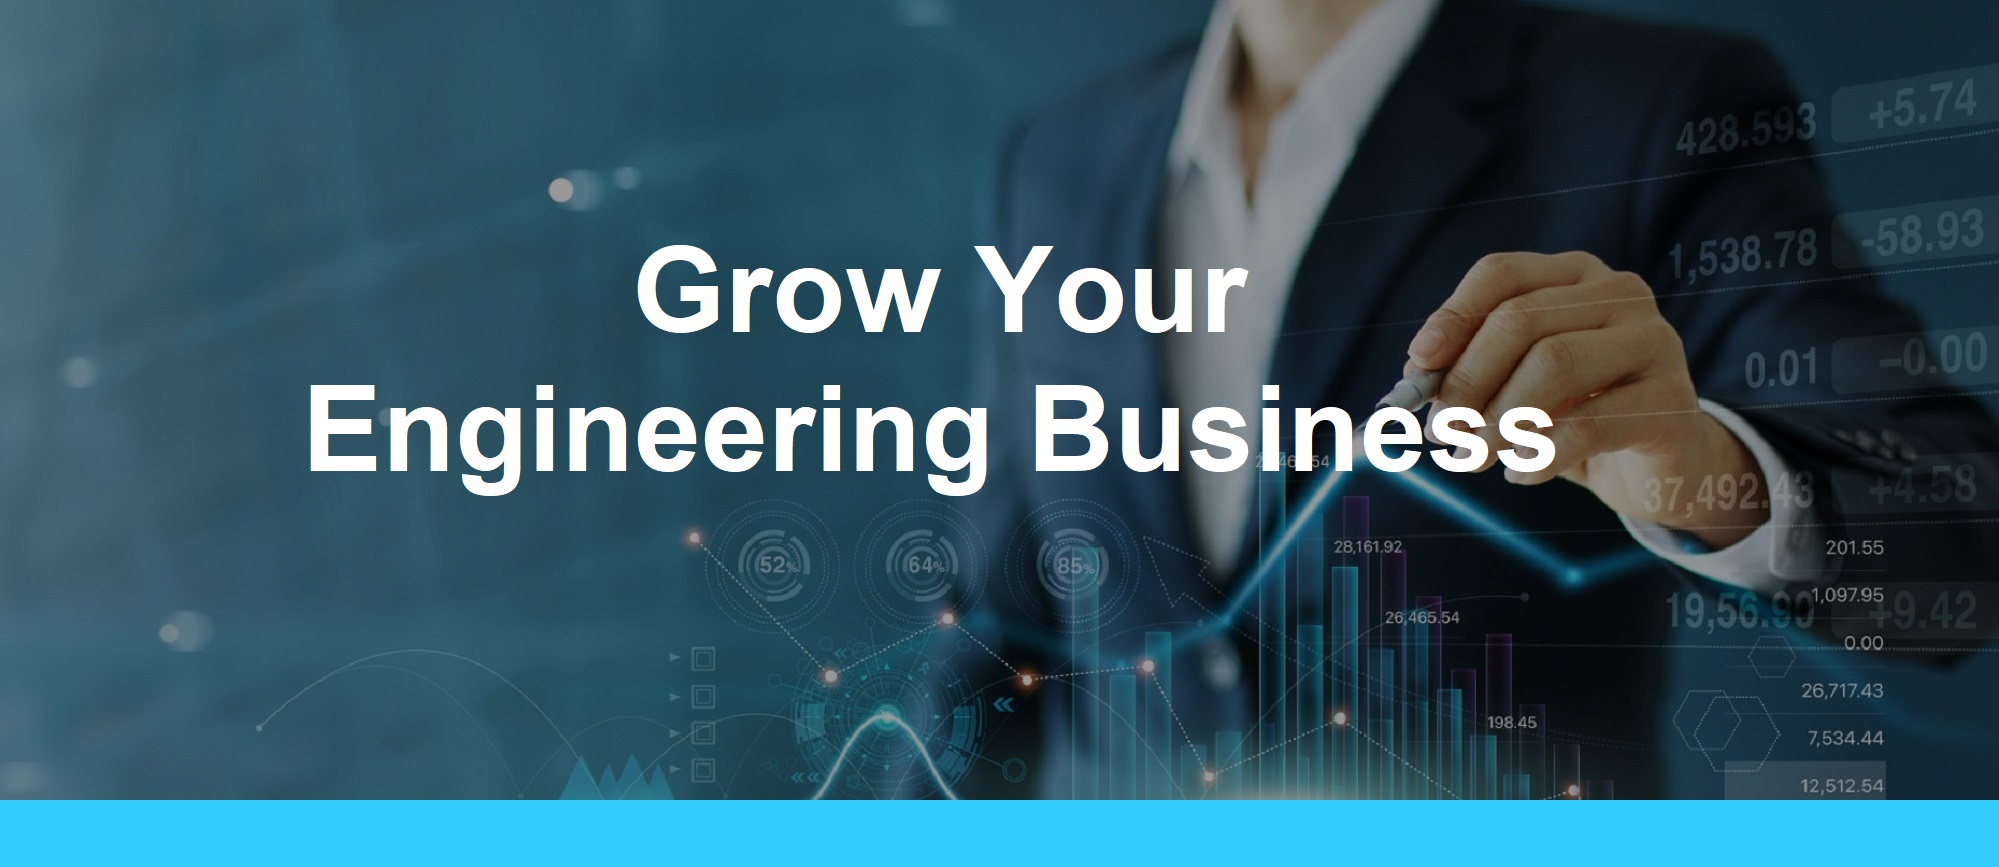 Grow Your Engineering Business